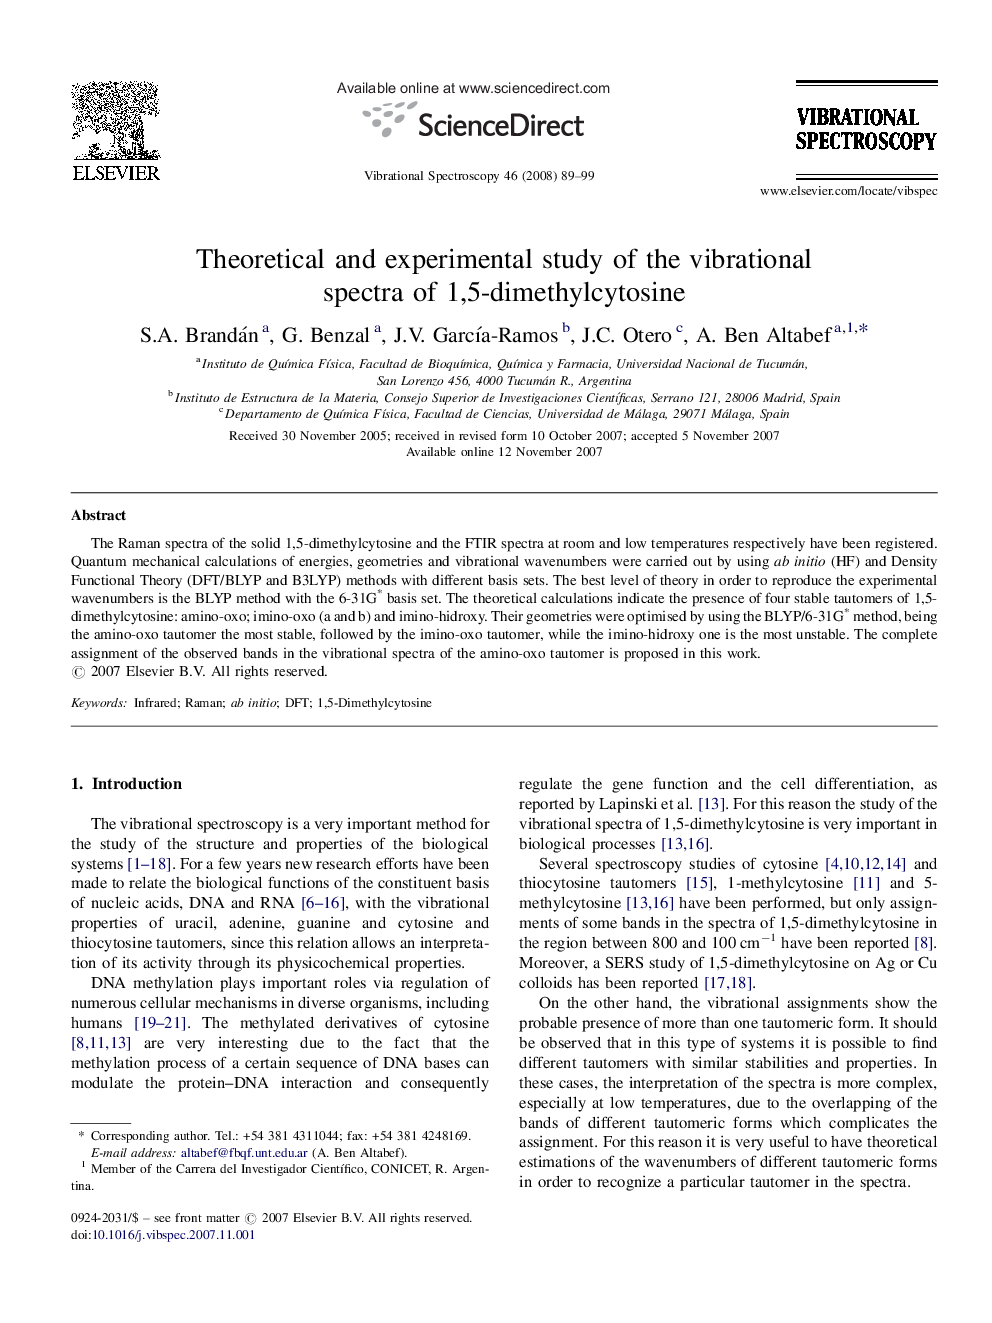 Theoretical and experimental study of the vibrational spectra of 1,5-dimethylcytosine